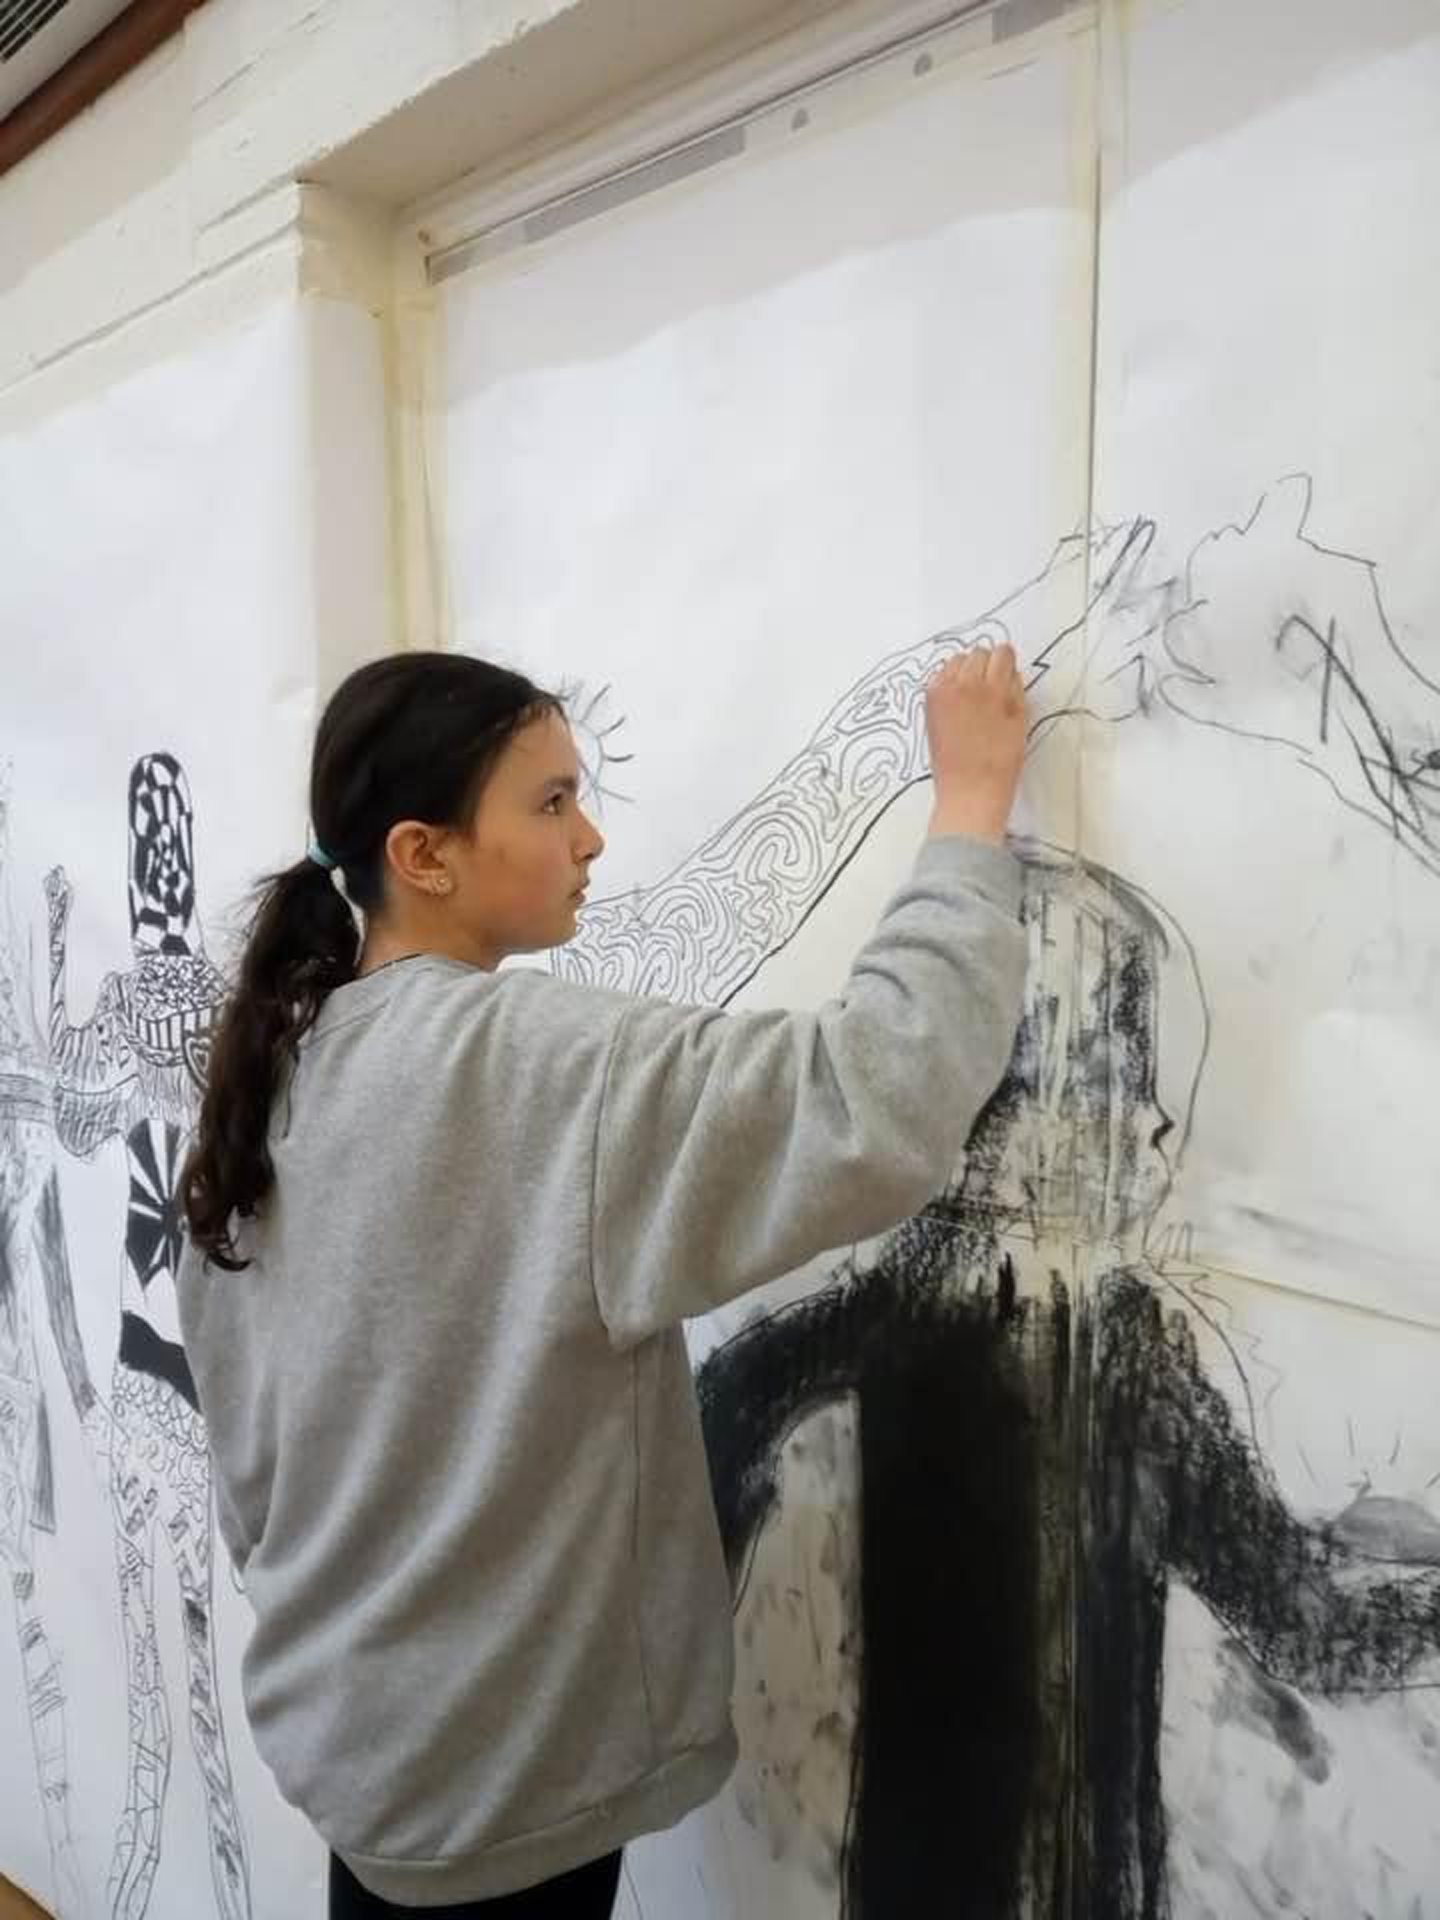 Pupil Maisie fills in part of her silhouette near where it connects to a classmate's at Big Draw 2022